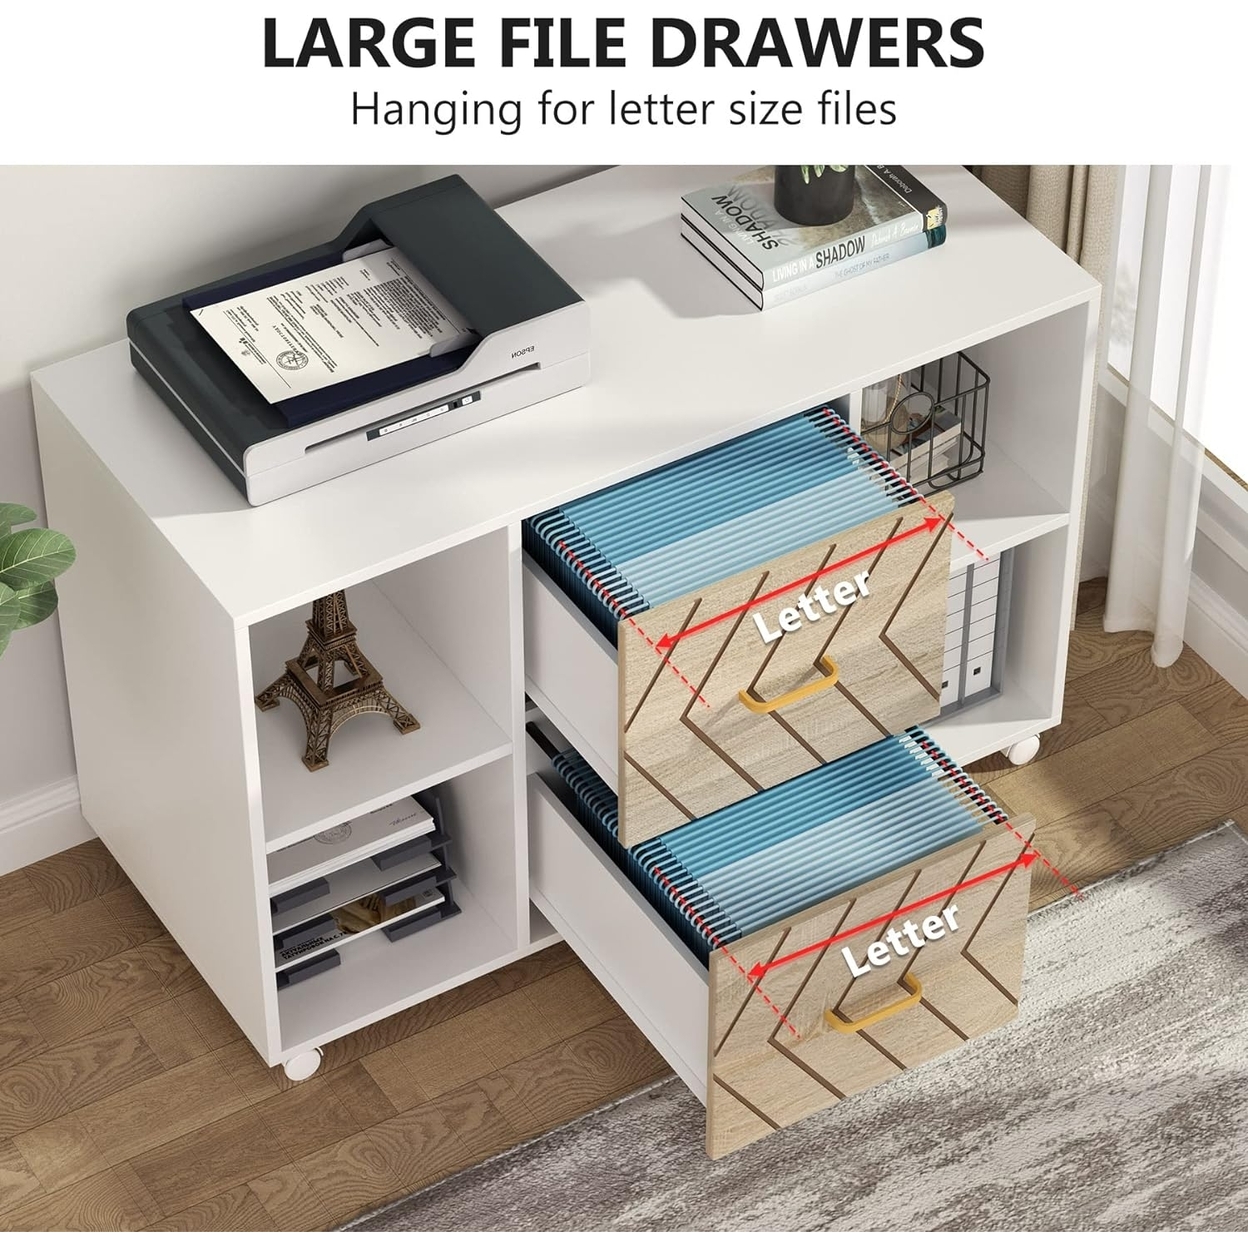 Tribesigns 2 Drawer File Cabinet, Large Mobile Lateral Filing Cabinet For Letter Size, Printer Stand With Storage Shelves & Rolling Wheels